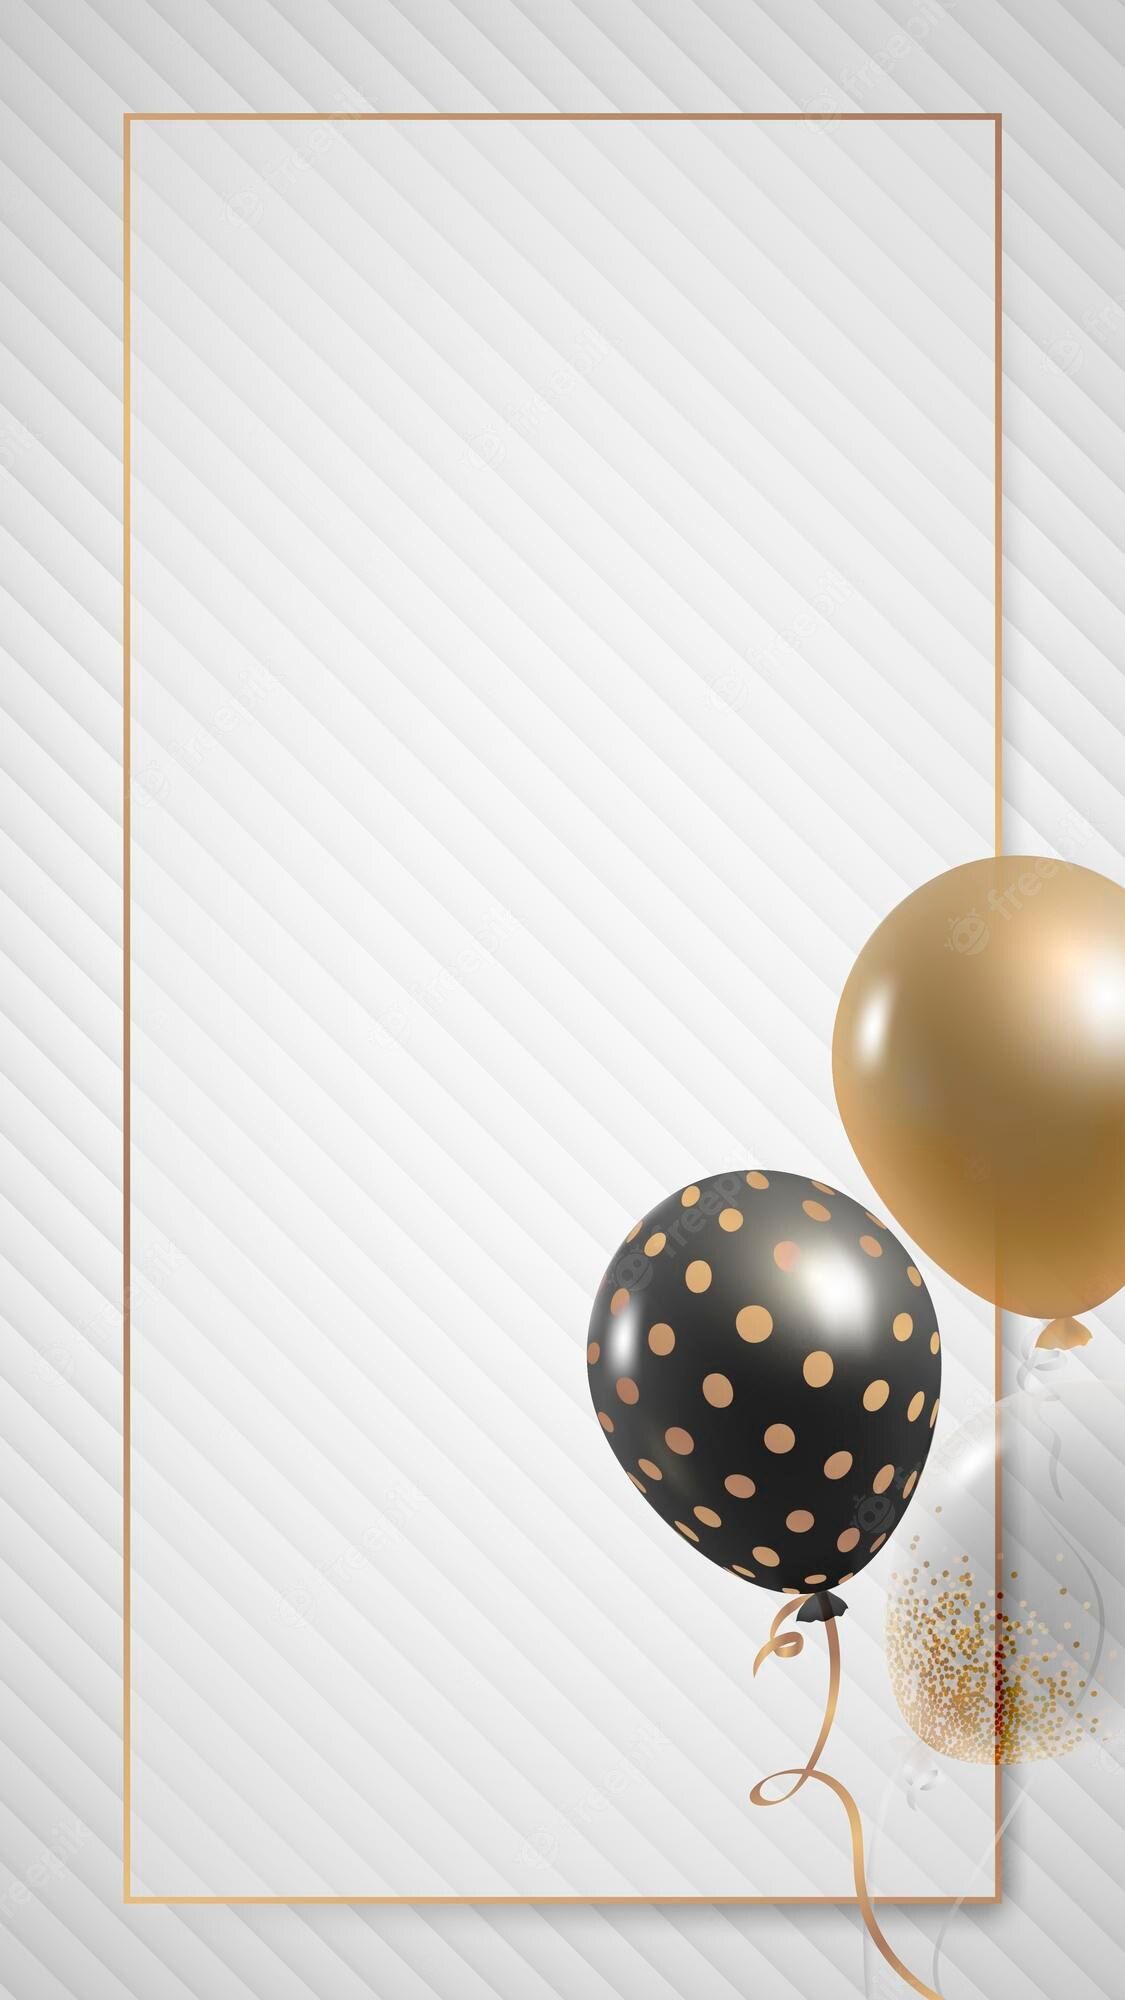 Birthday party background with balloons and golden frame - Birthday